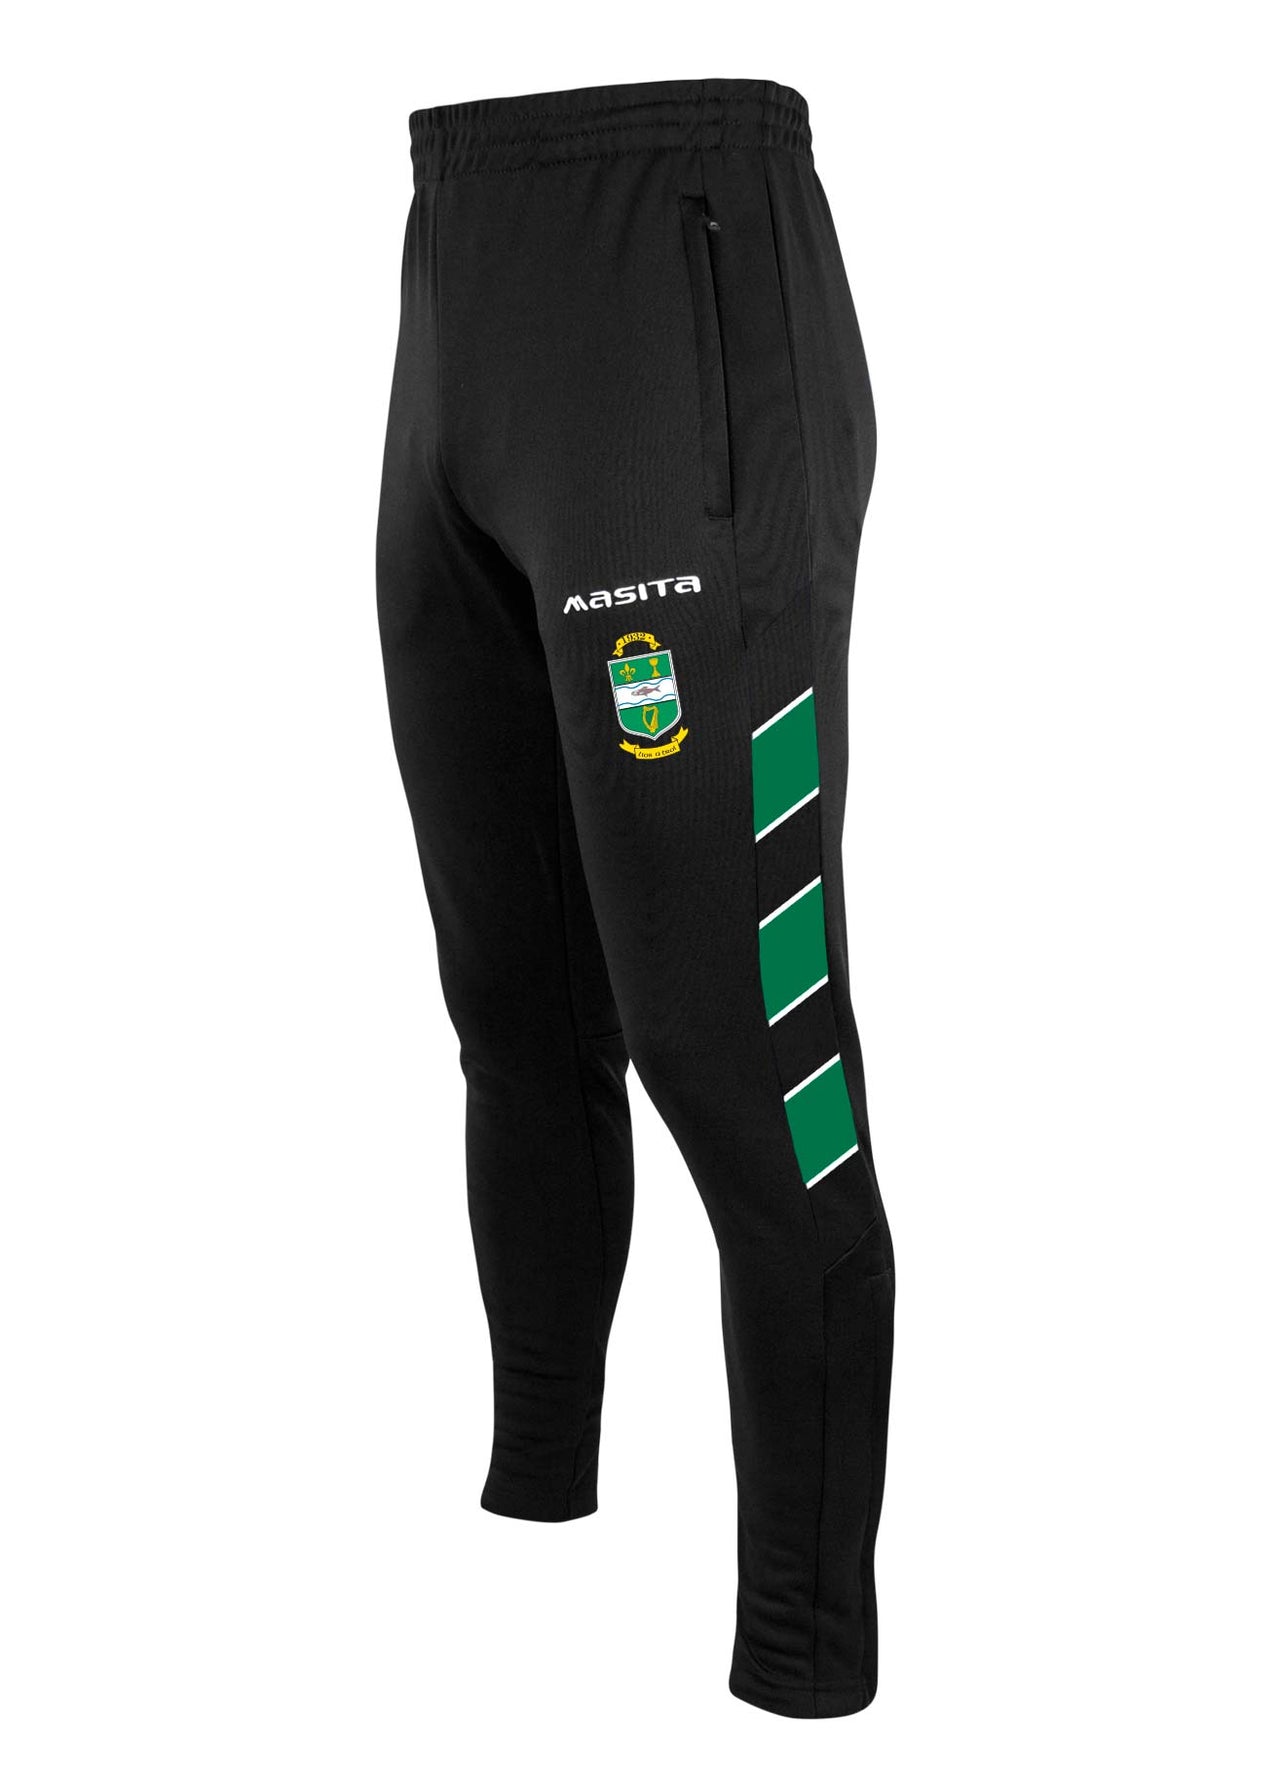 Listry GAA Cong Style Skinny Bottoms Adults